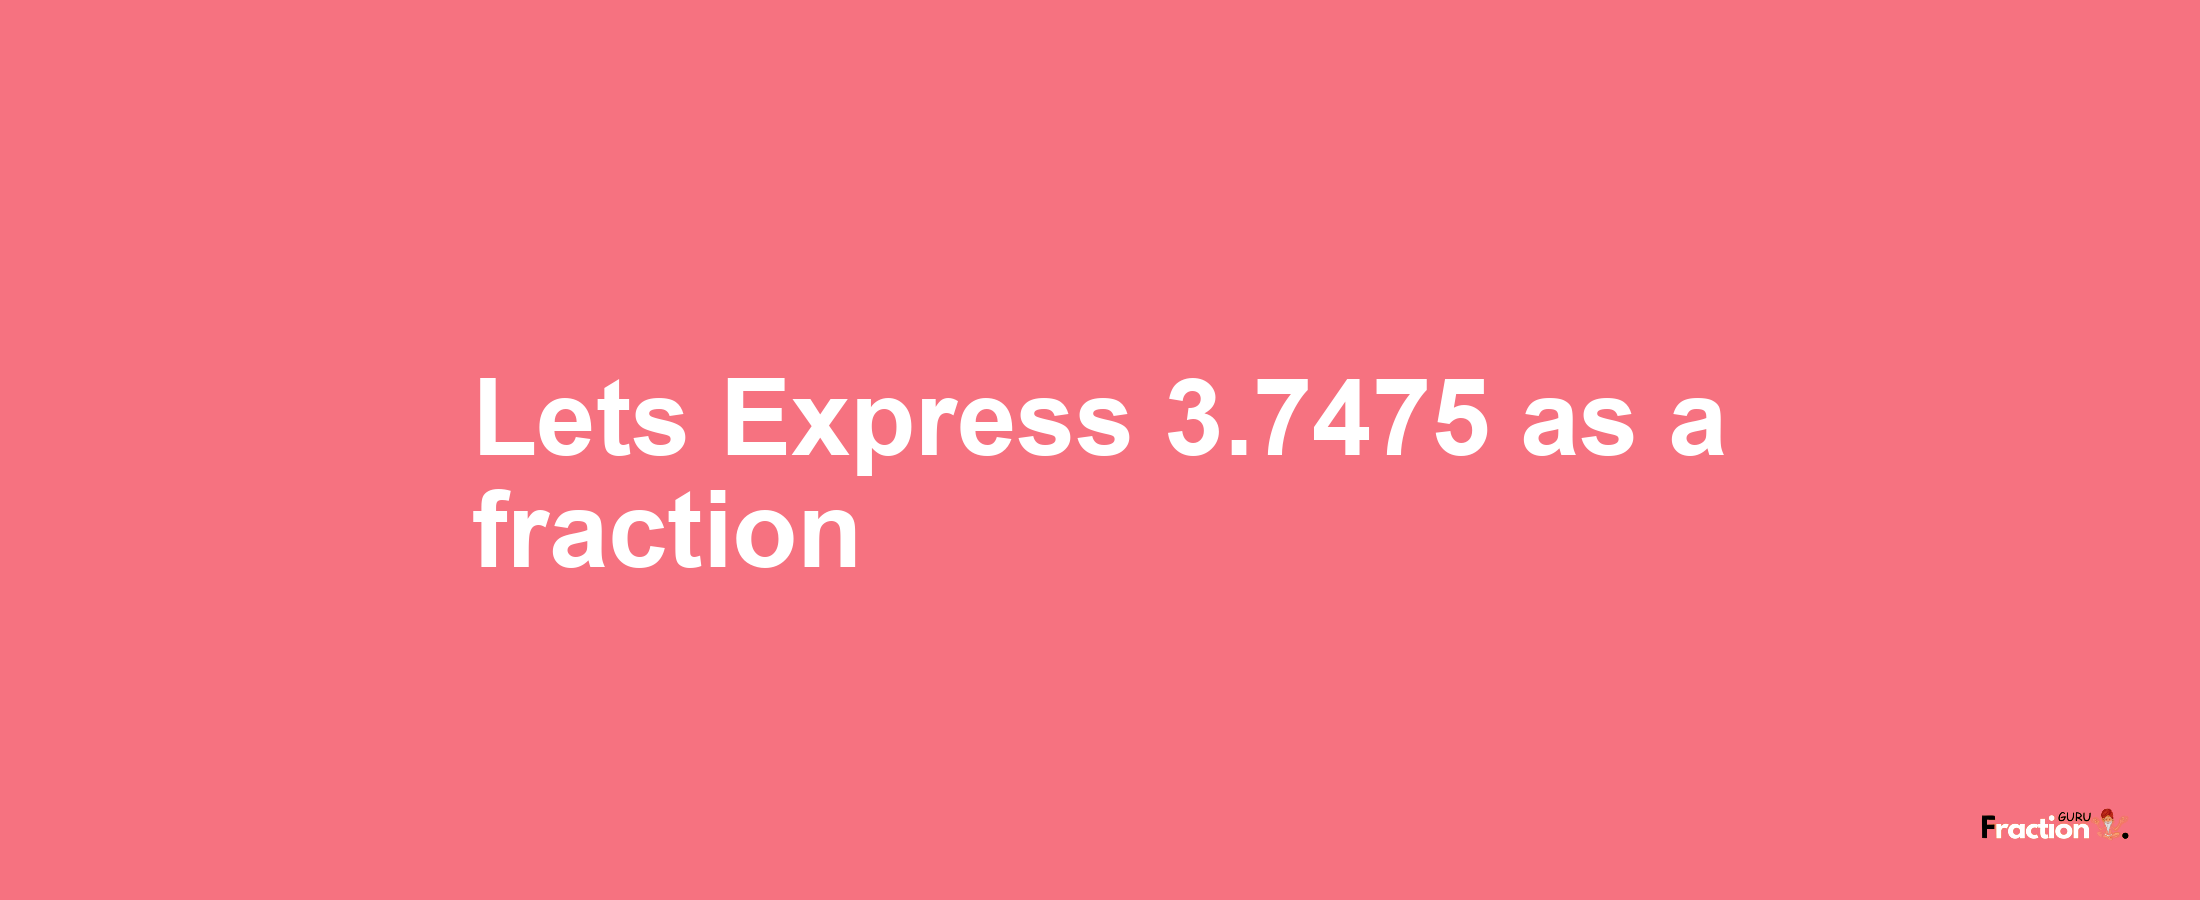 Lets Express 3.7475 as afraction